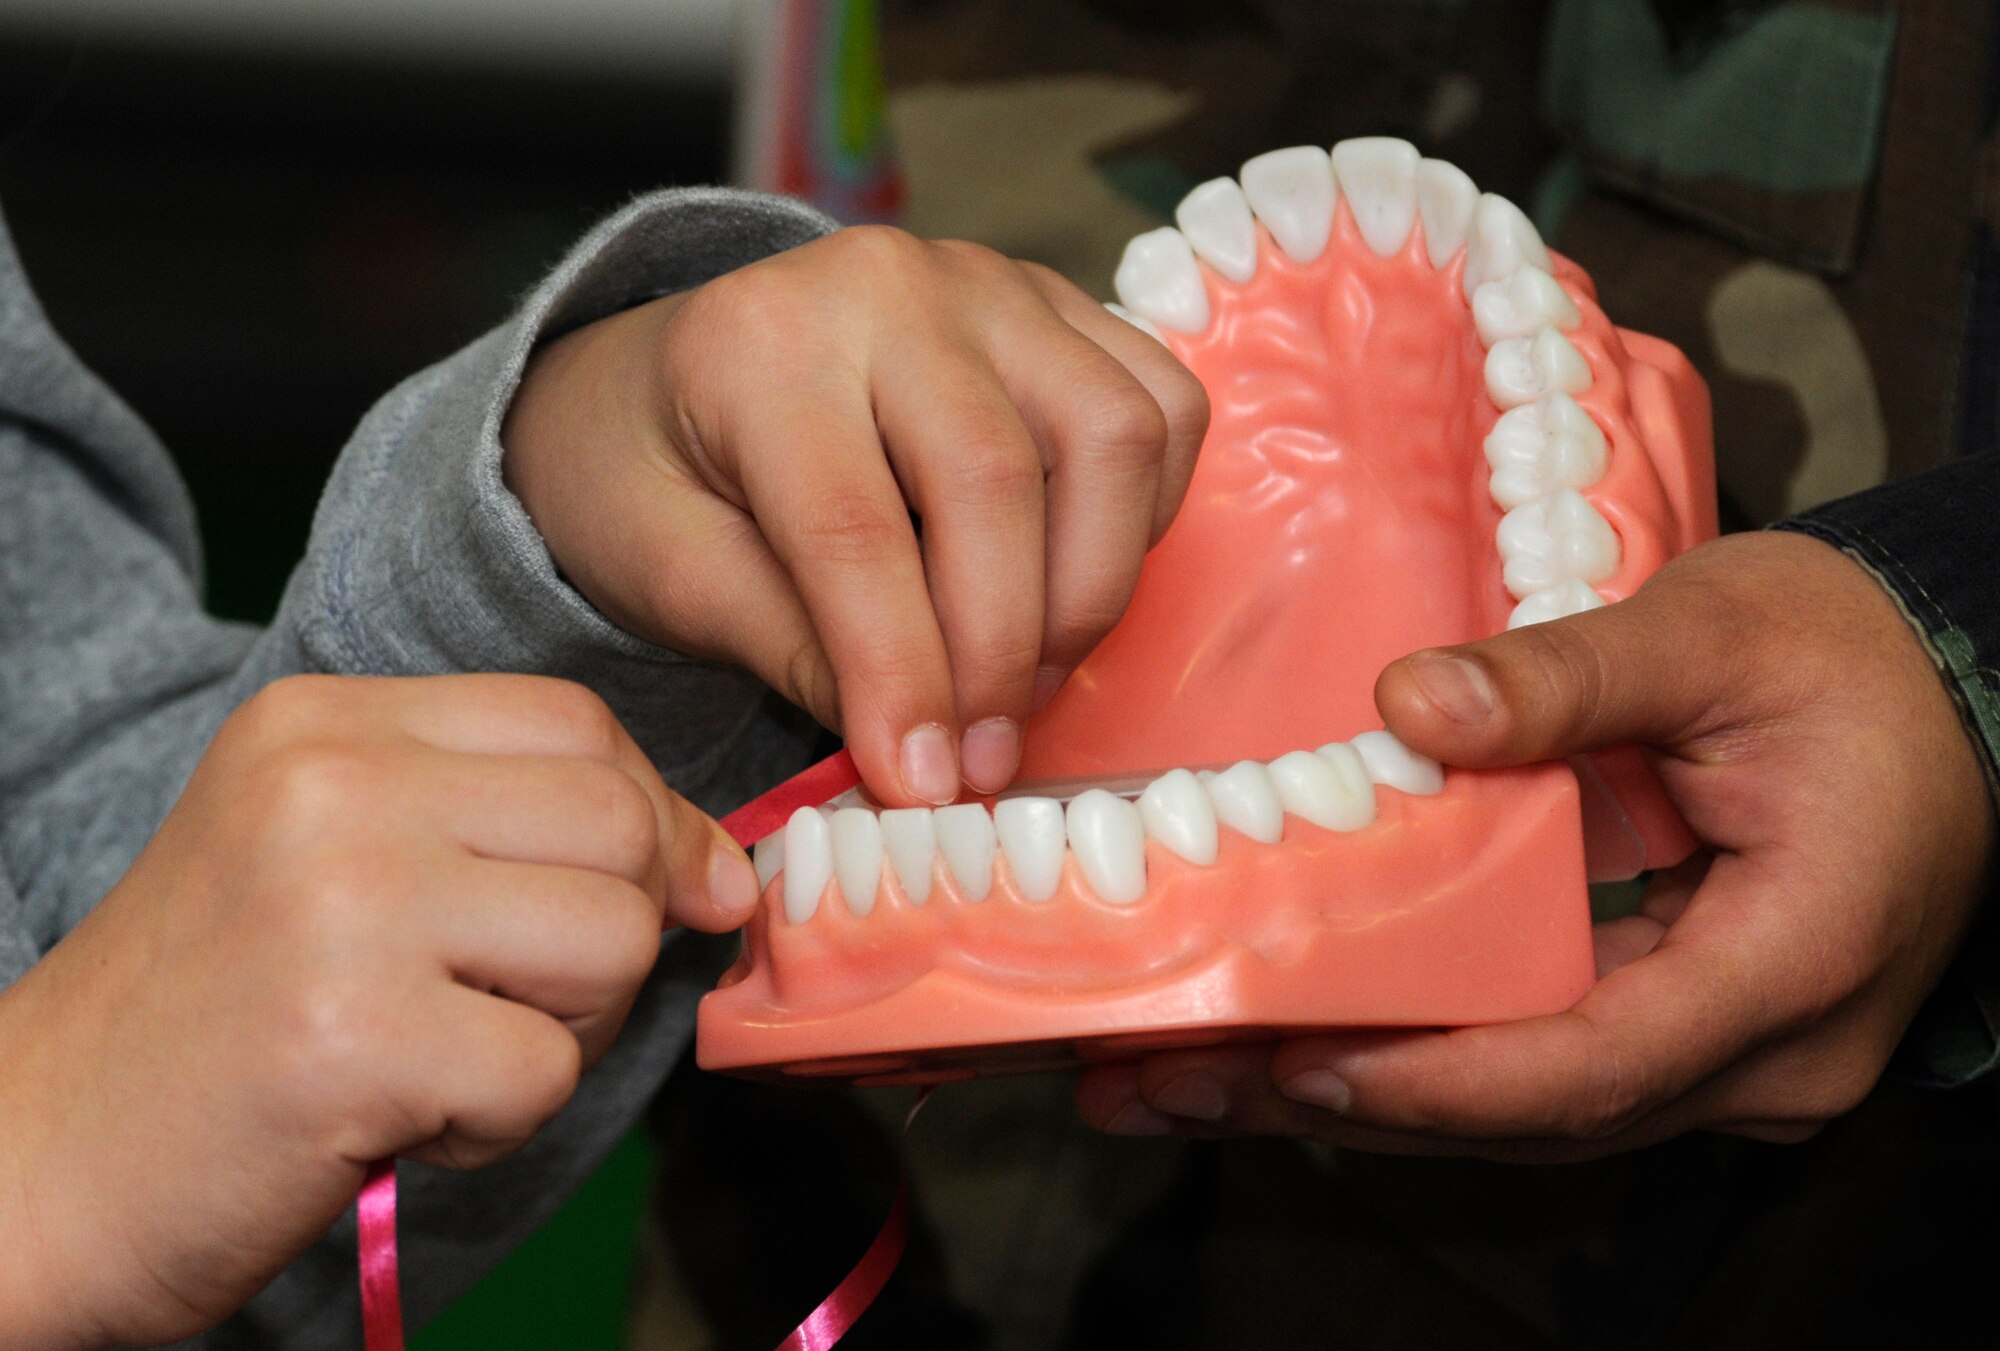 SPANGDAHLEM AIR BASE, Germany –Representatives from the 52nd Dental Squadron teach proper flossing techniques Feb. 9 at the Bitburg Elementary School. Each February, the American Dental Association sponsors National Children’s Dental Health Month. In addition to visiting elementary and middle schools, the 52nd DS is opening the Spangdahlem Dental Clinic Feb. 27 to offer walk-ins for children up to 10 years of age. (U.S. Air Force photo/Airman 1st Class Staci Miller)